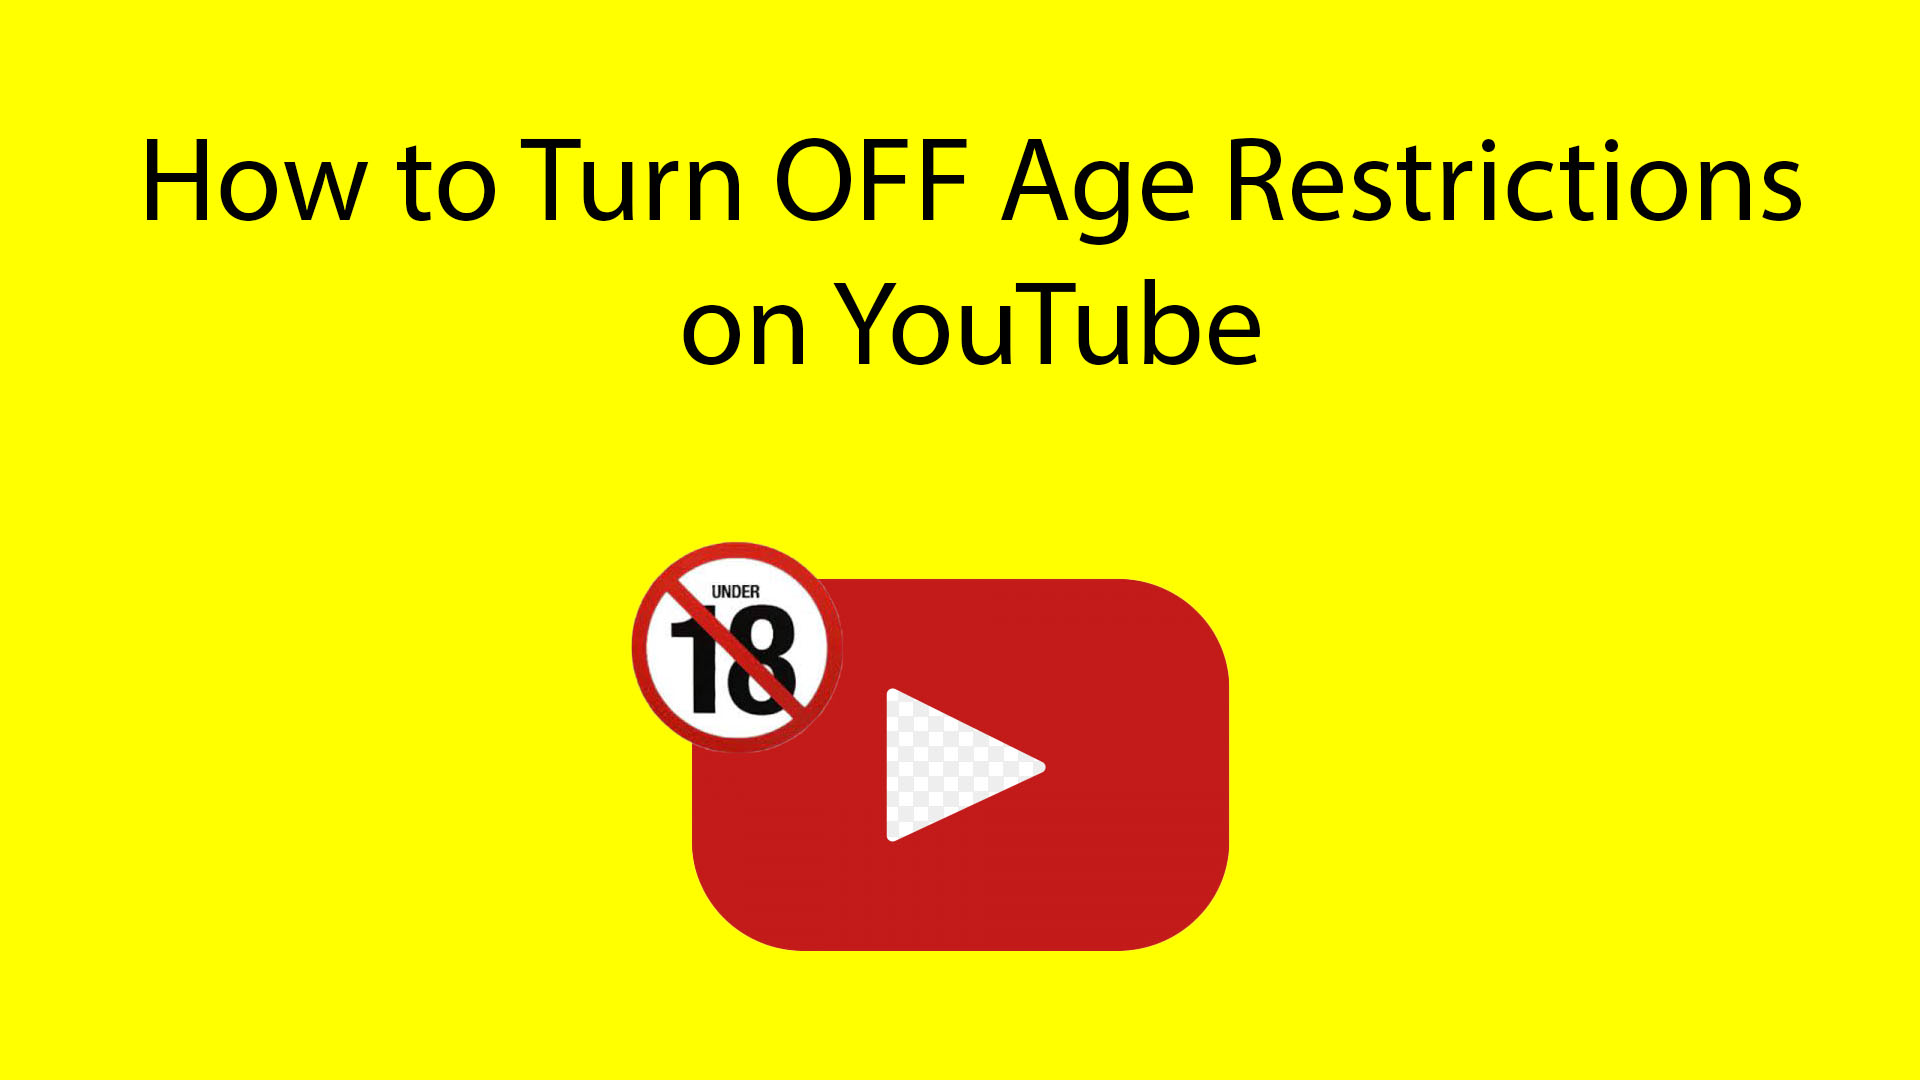 How to turn off age restrictions on YouTube